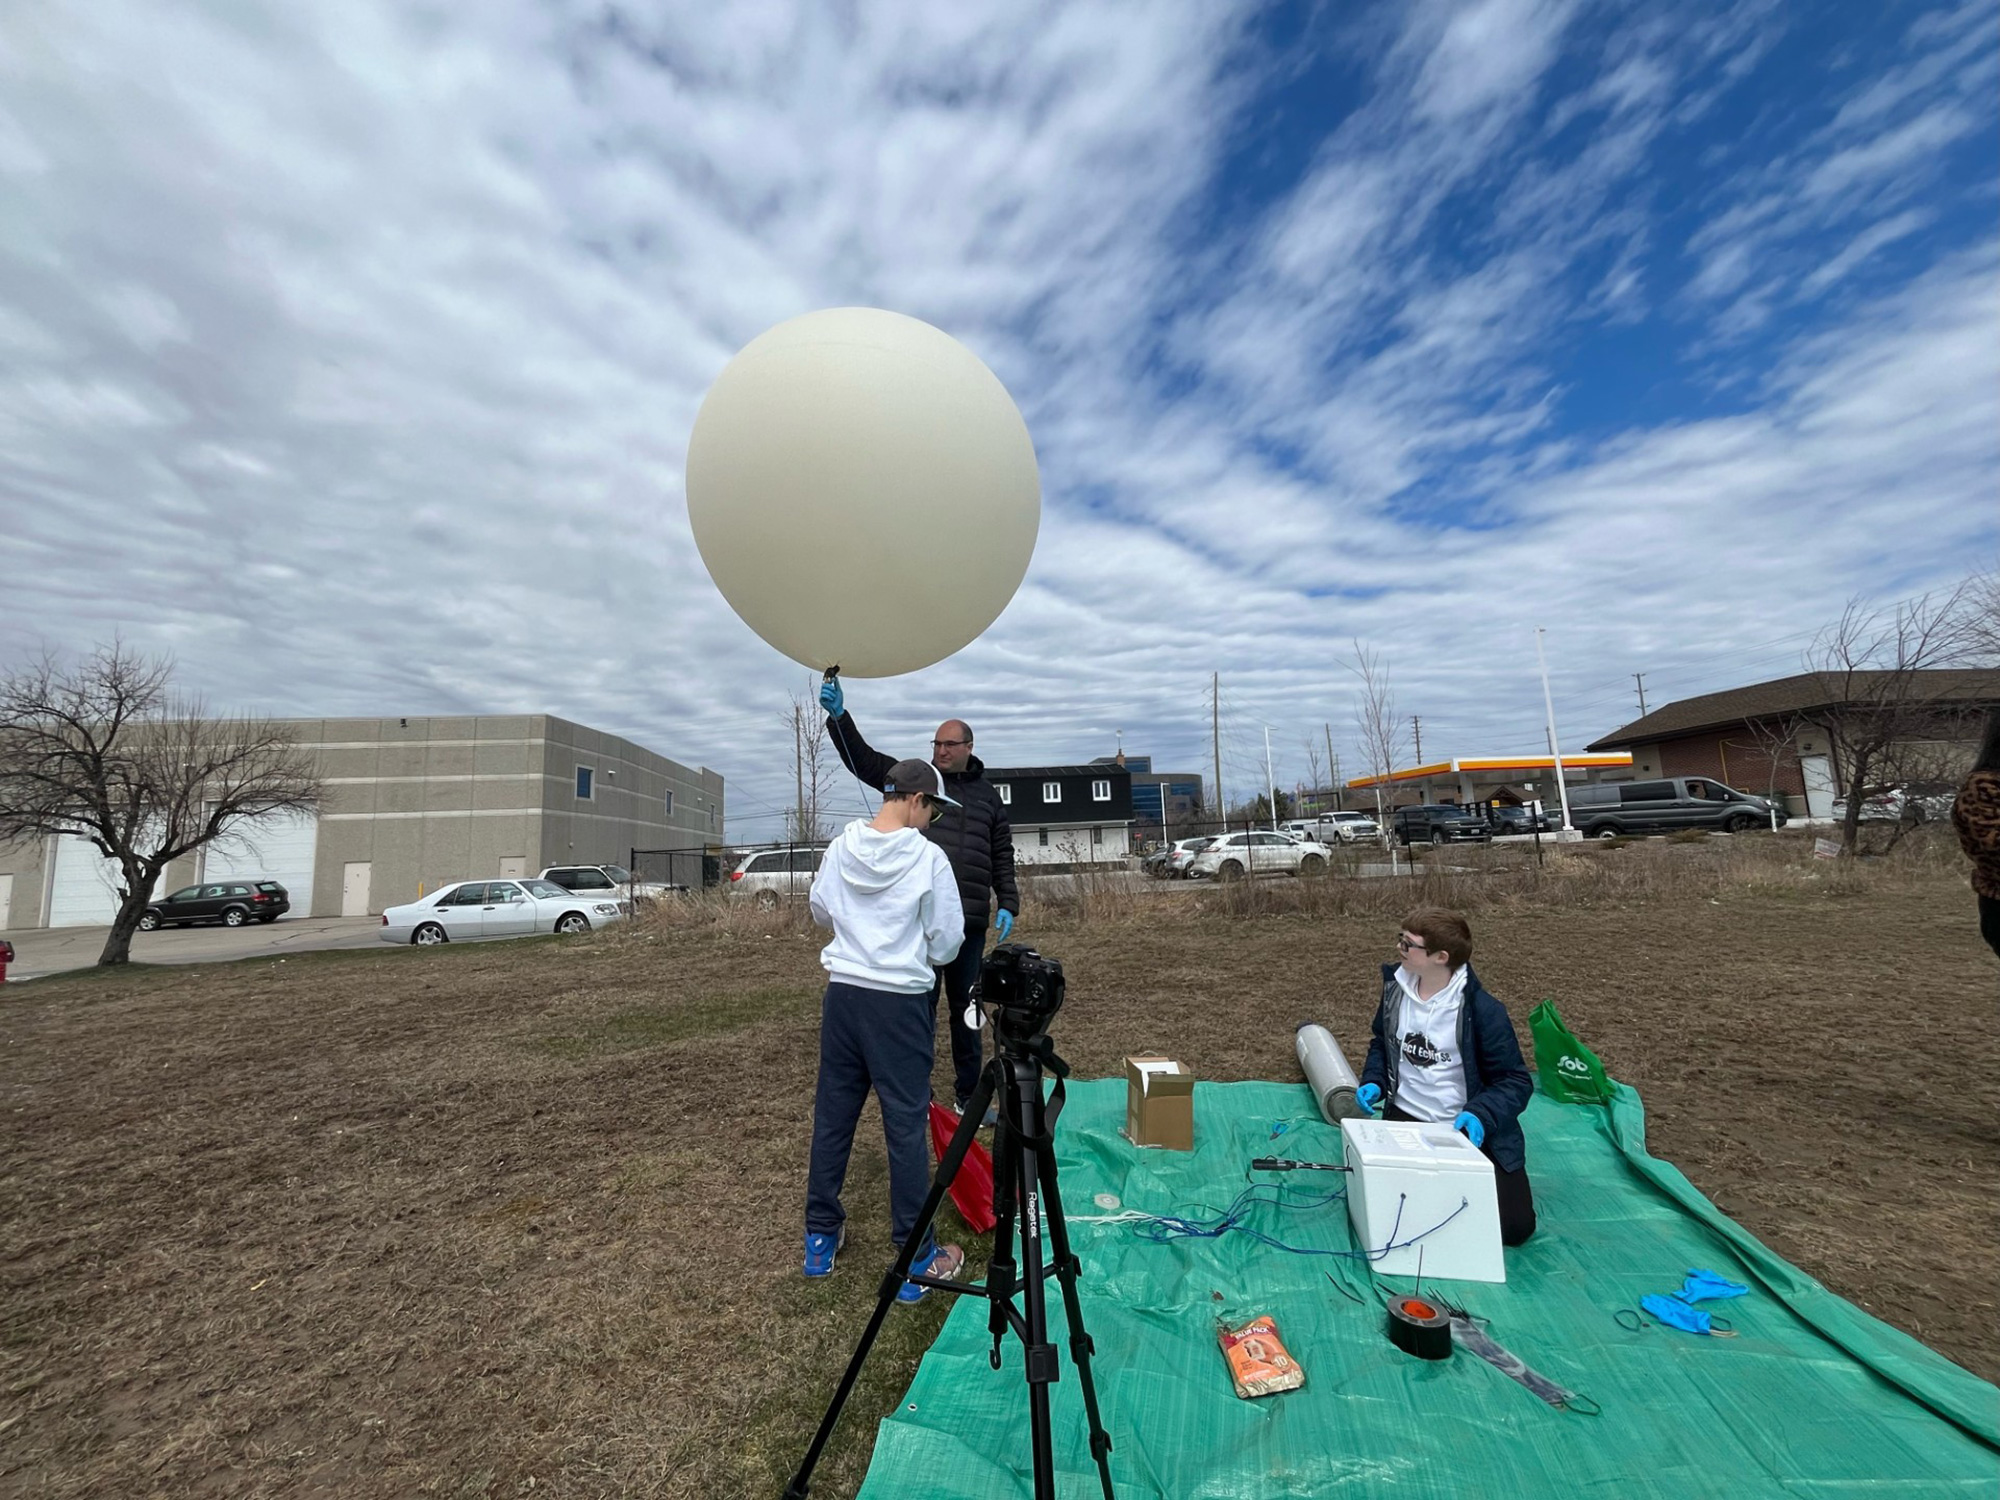 Members of the team prepare the weather balloon for release.